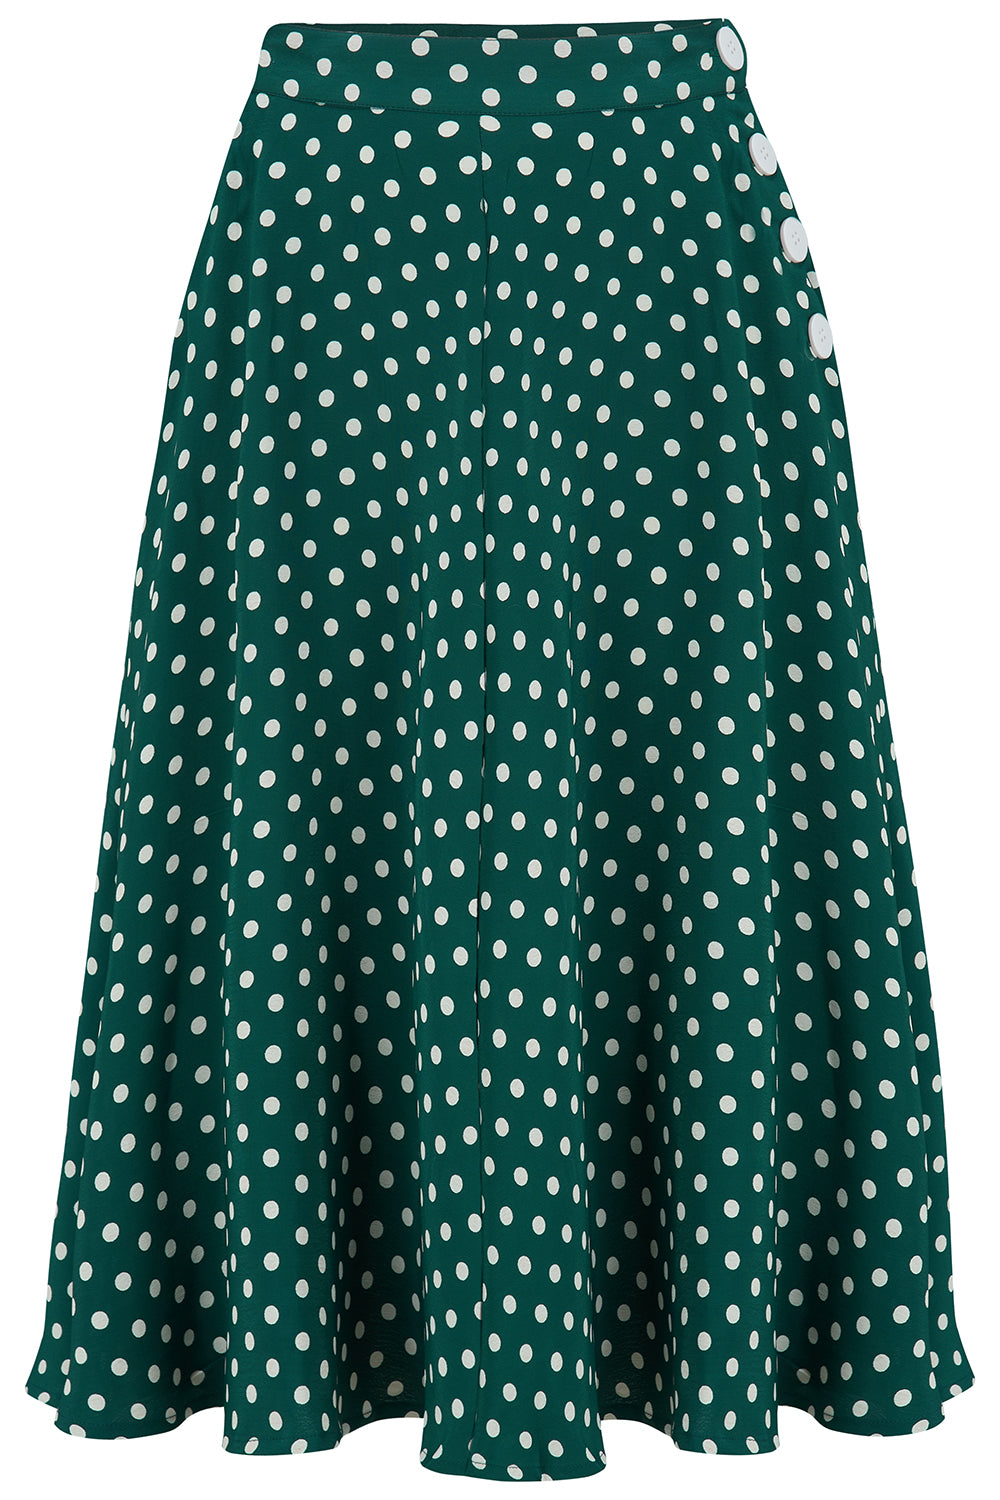 "Isabelle" Skirt in Green Polka , Classic & Authentic 1940s Vintage Inspired Style - True and authentic vintage style clothing, inspired by the Classic styles of CC41 , WW2 and the fun 1950s RocknRoll era, for everyday wear plus events like Goodwood Revival, Twinwood Festival and Viva Las Vegas Rockabilly Weekend Rock n Romance The Seamstress Of Bloomsbury